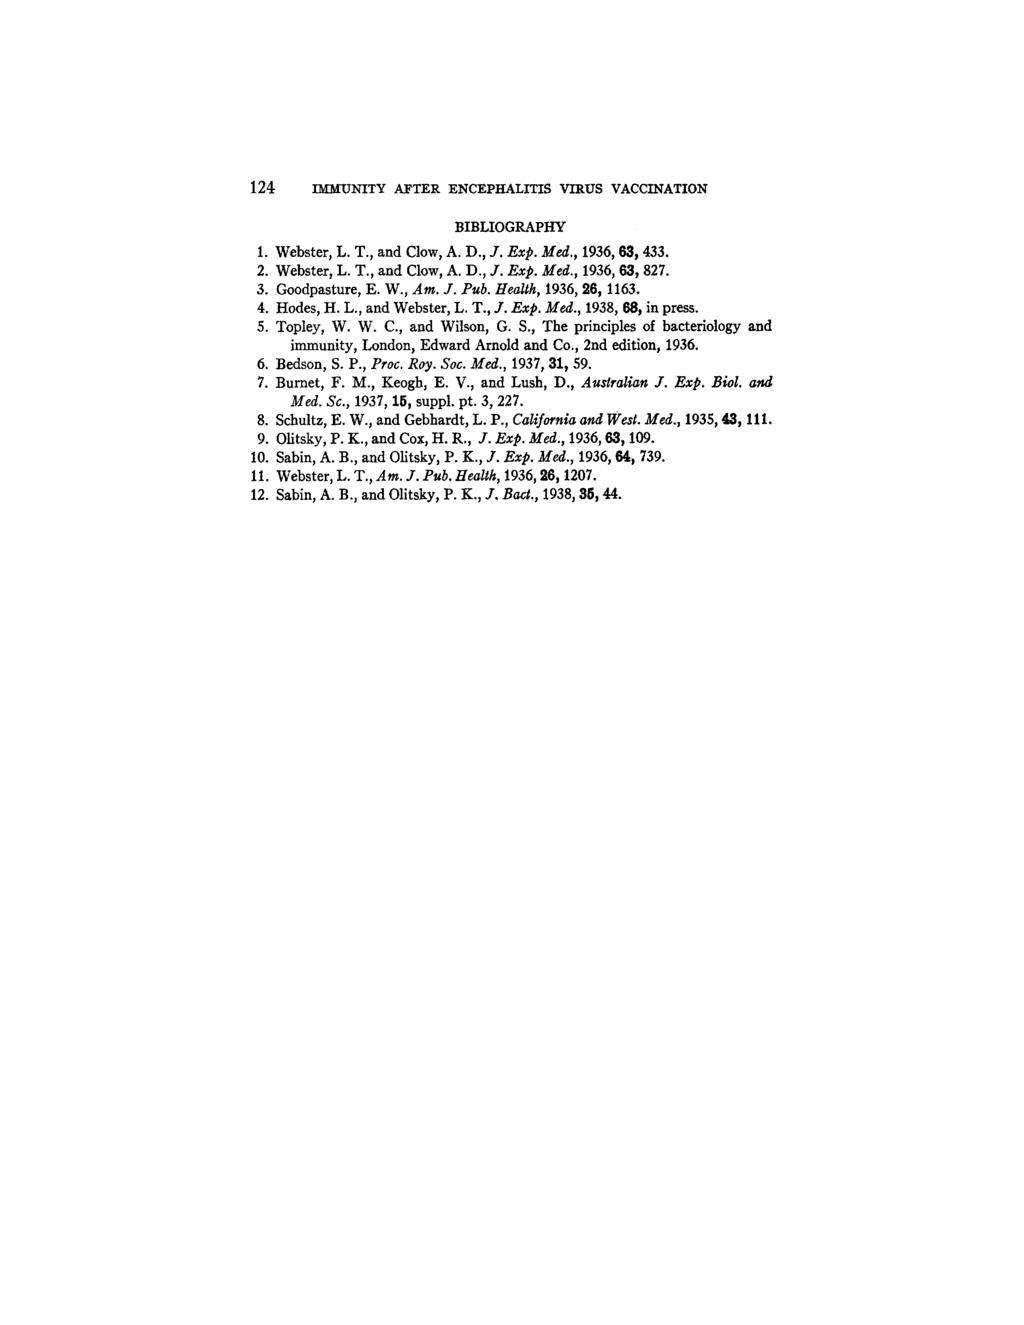 124 IMMUNITY AFTER ENCEPHALITIS VIRUS VACCINATION BIBLIOGRAPHY 1. Webster, L. T., and Clow, A. D., 3". Exp. Med., 1936, 63~ 433. 2. Webster, L. T., and Clow, A. D., ]. Exp. Med., 1936, 63, 827. 3. Goodpasture, E.